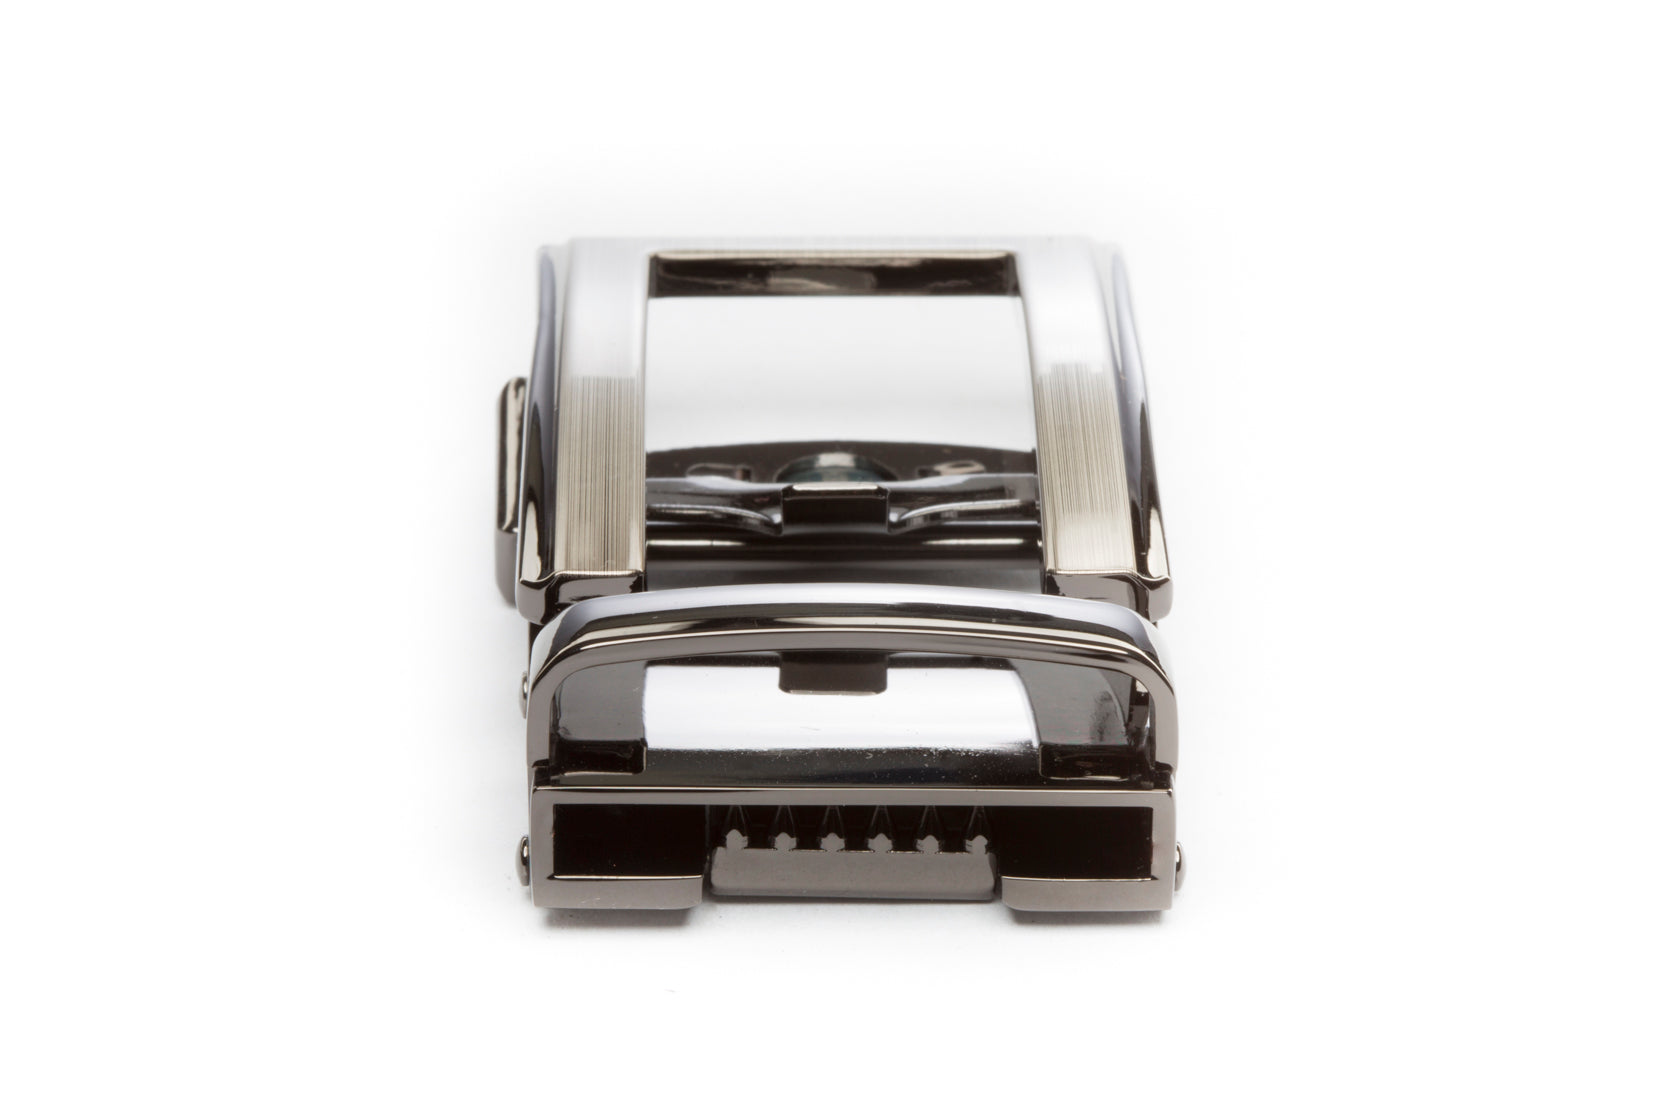 Men's traditional ratchet belt buckle in formal gunmetal with a width of 1.5 inches, rear view.